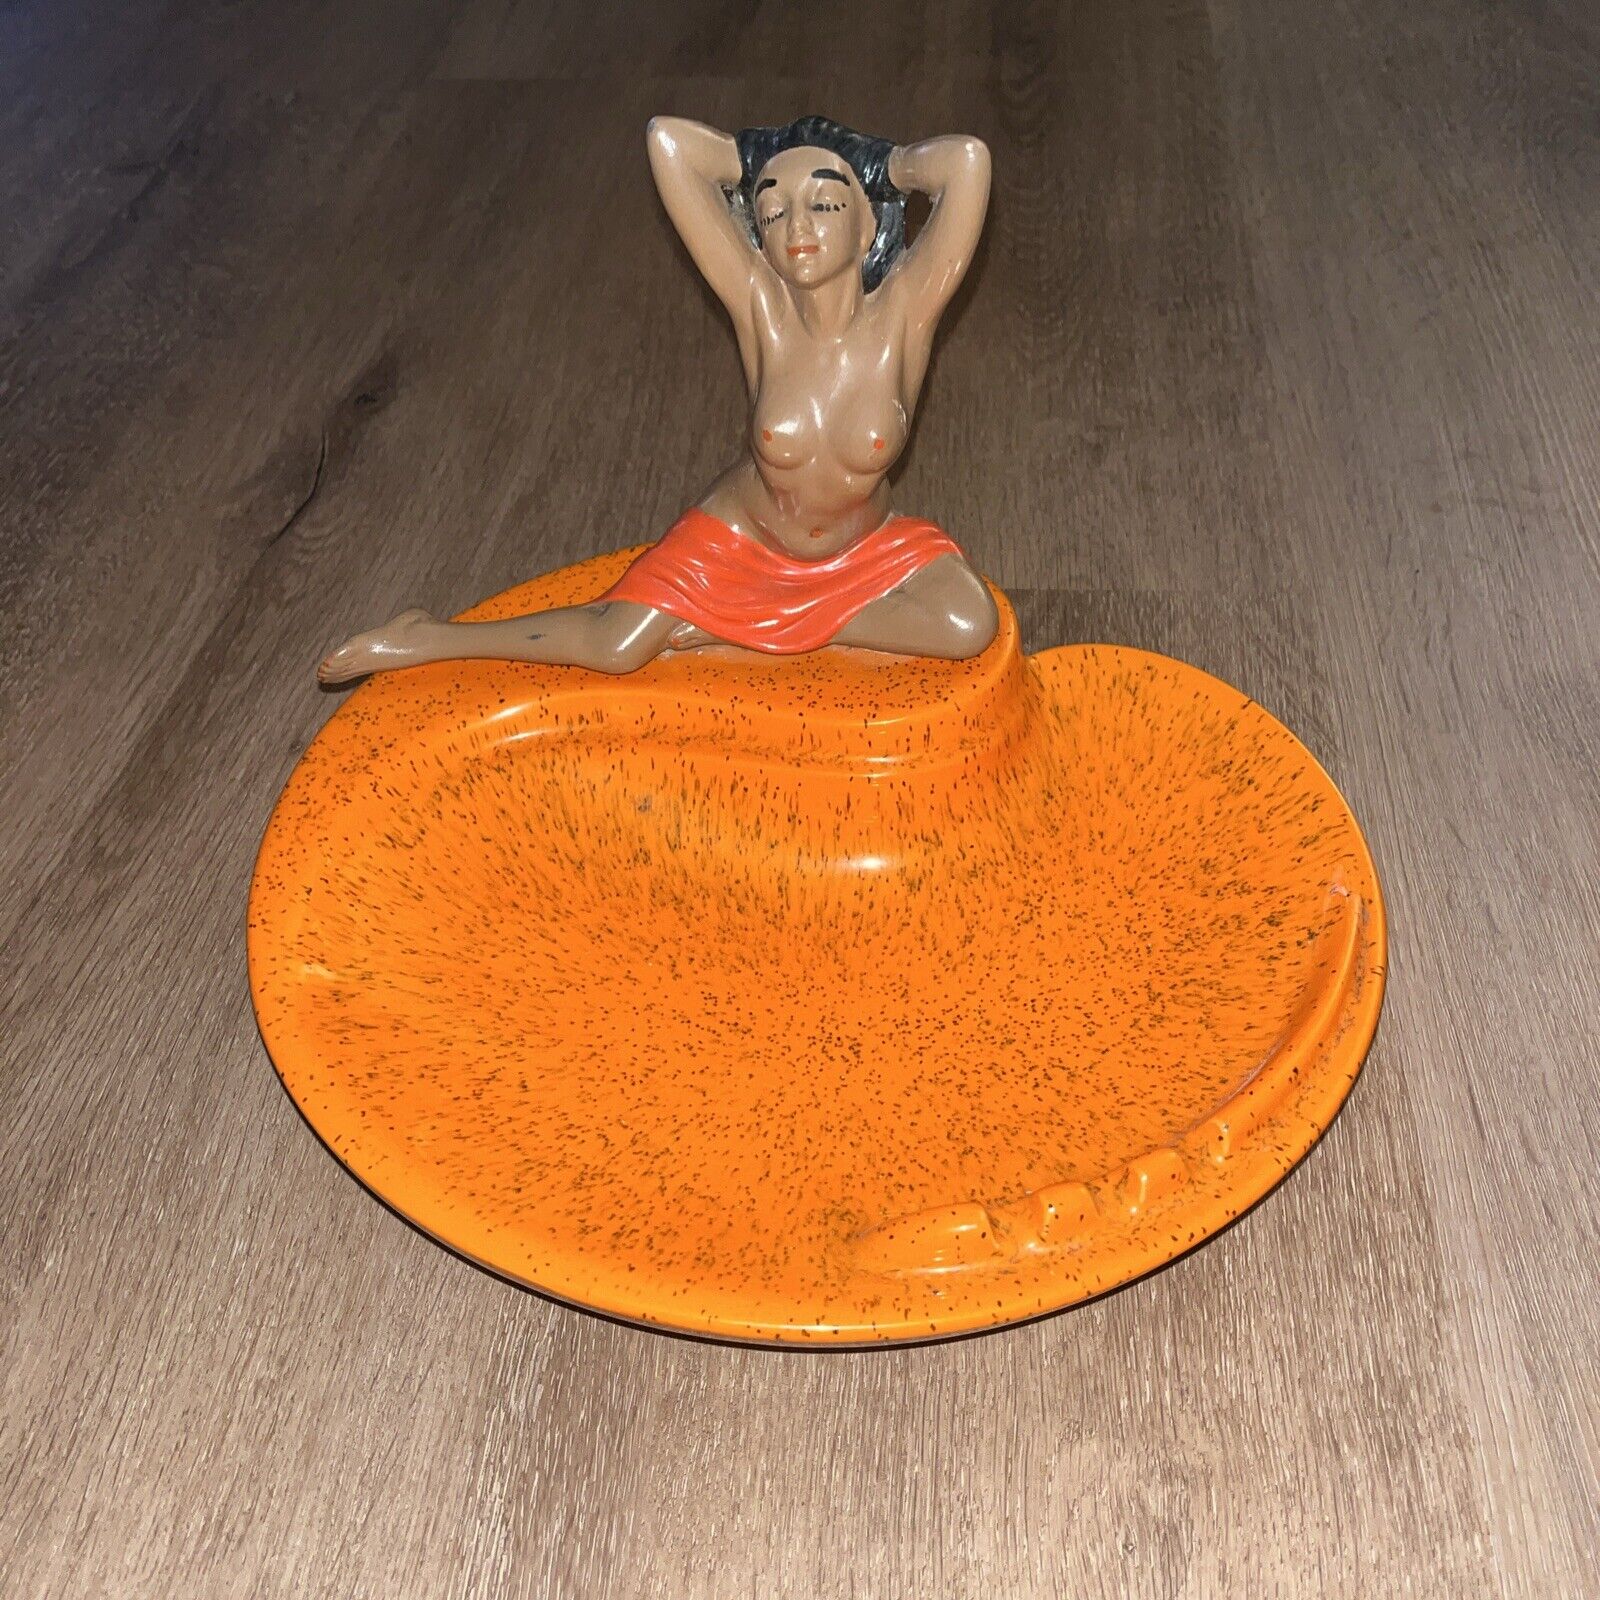 Vintage 1950s-60s PIN-UP NUDE LADY ASHTRAY